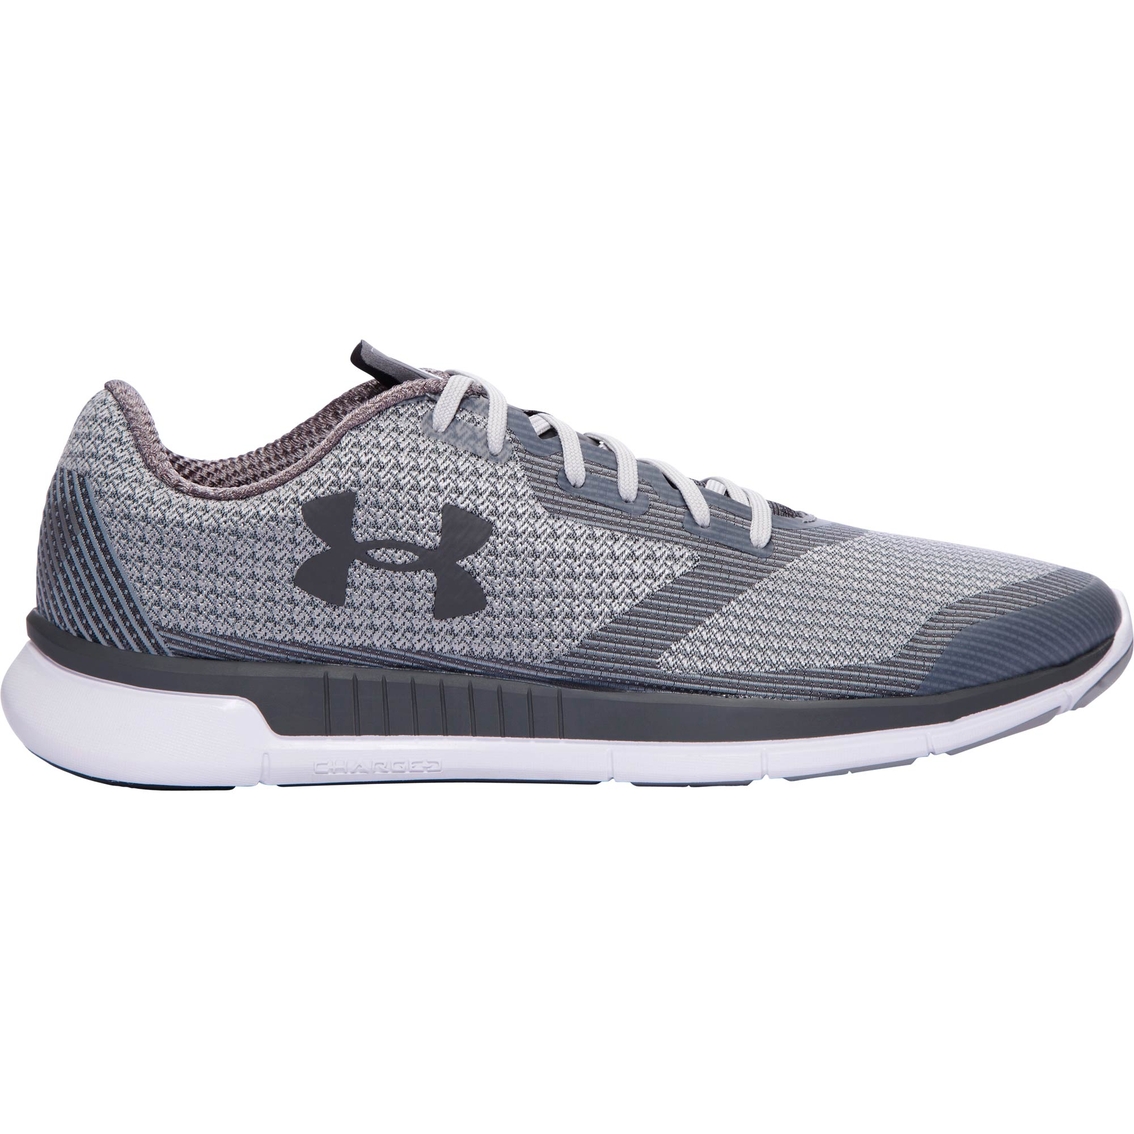 Under Armour Charged Lightning Running Shoes | Running | Shoes | Shop ...